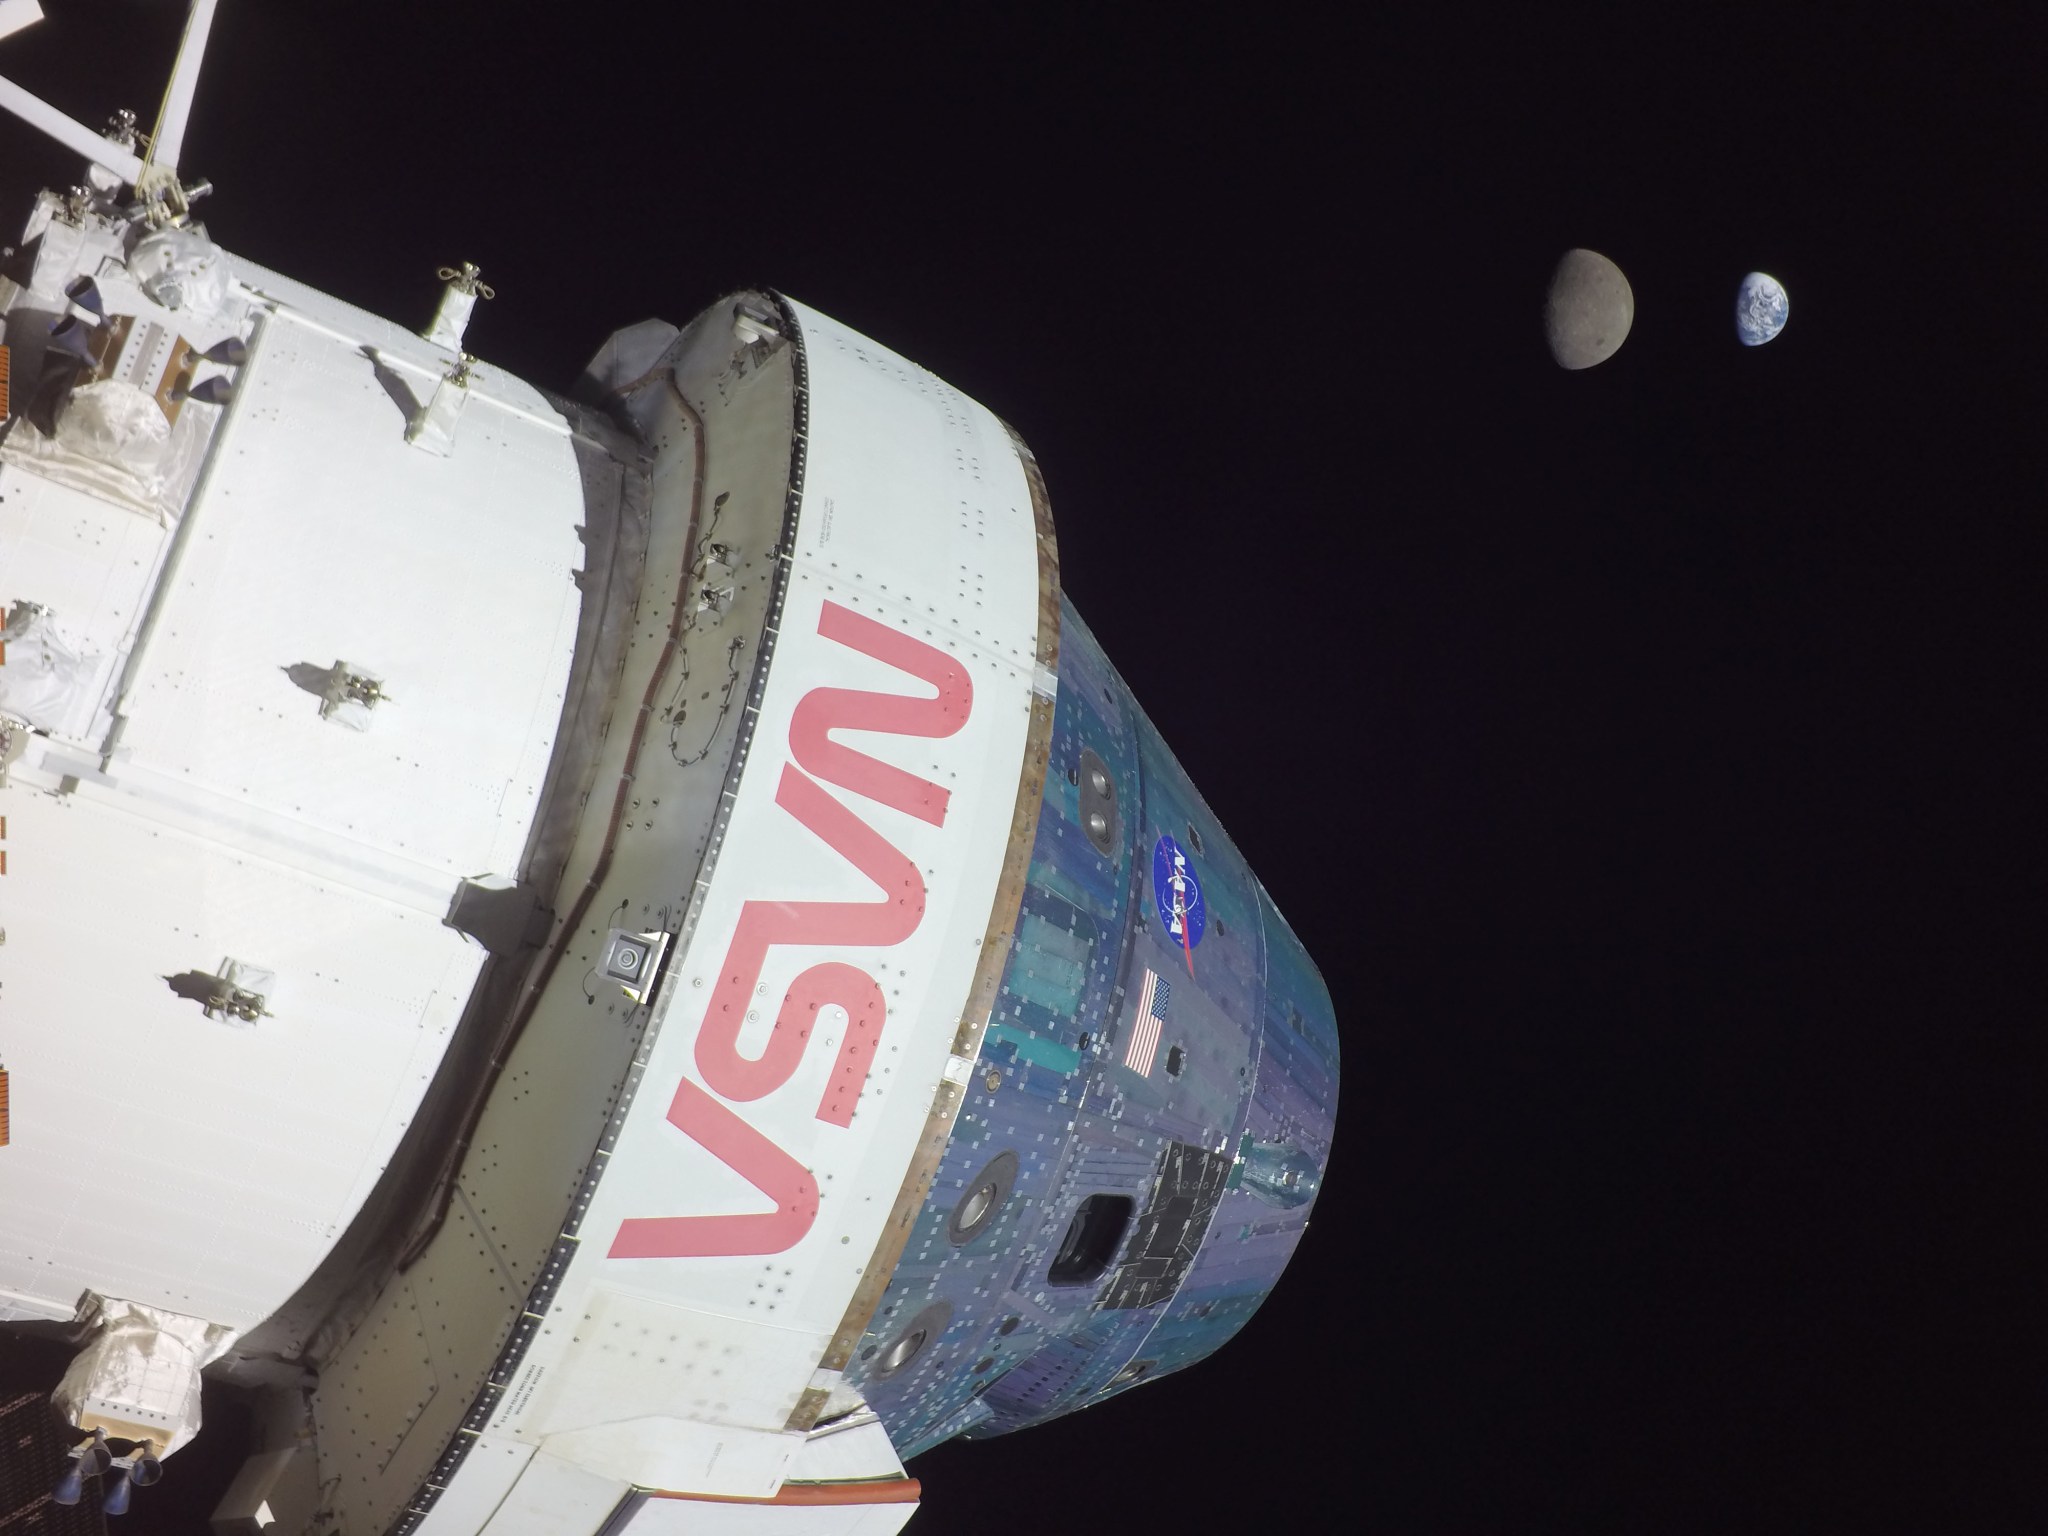 The Earth and Moon appear side by side off in the distance while the Orion crew module is in the foreground.